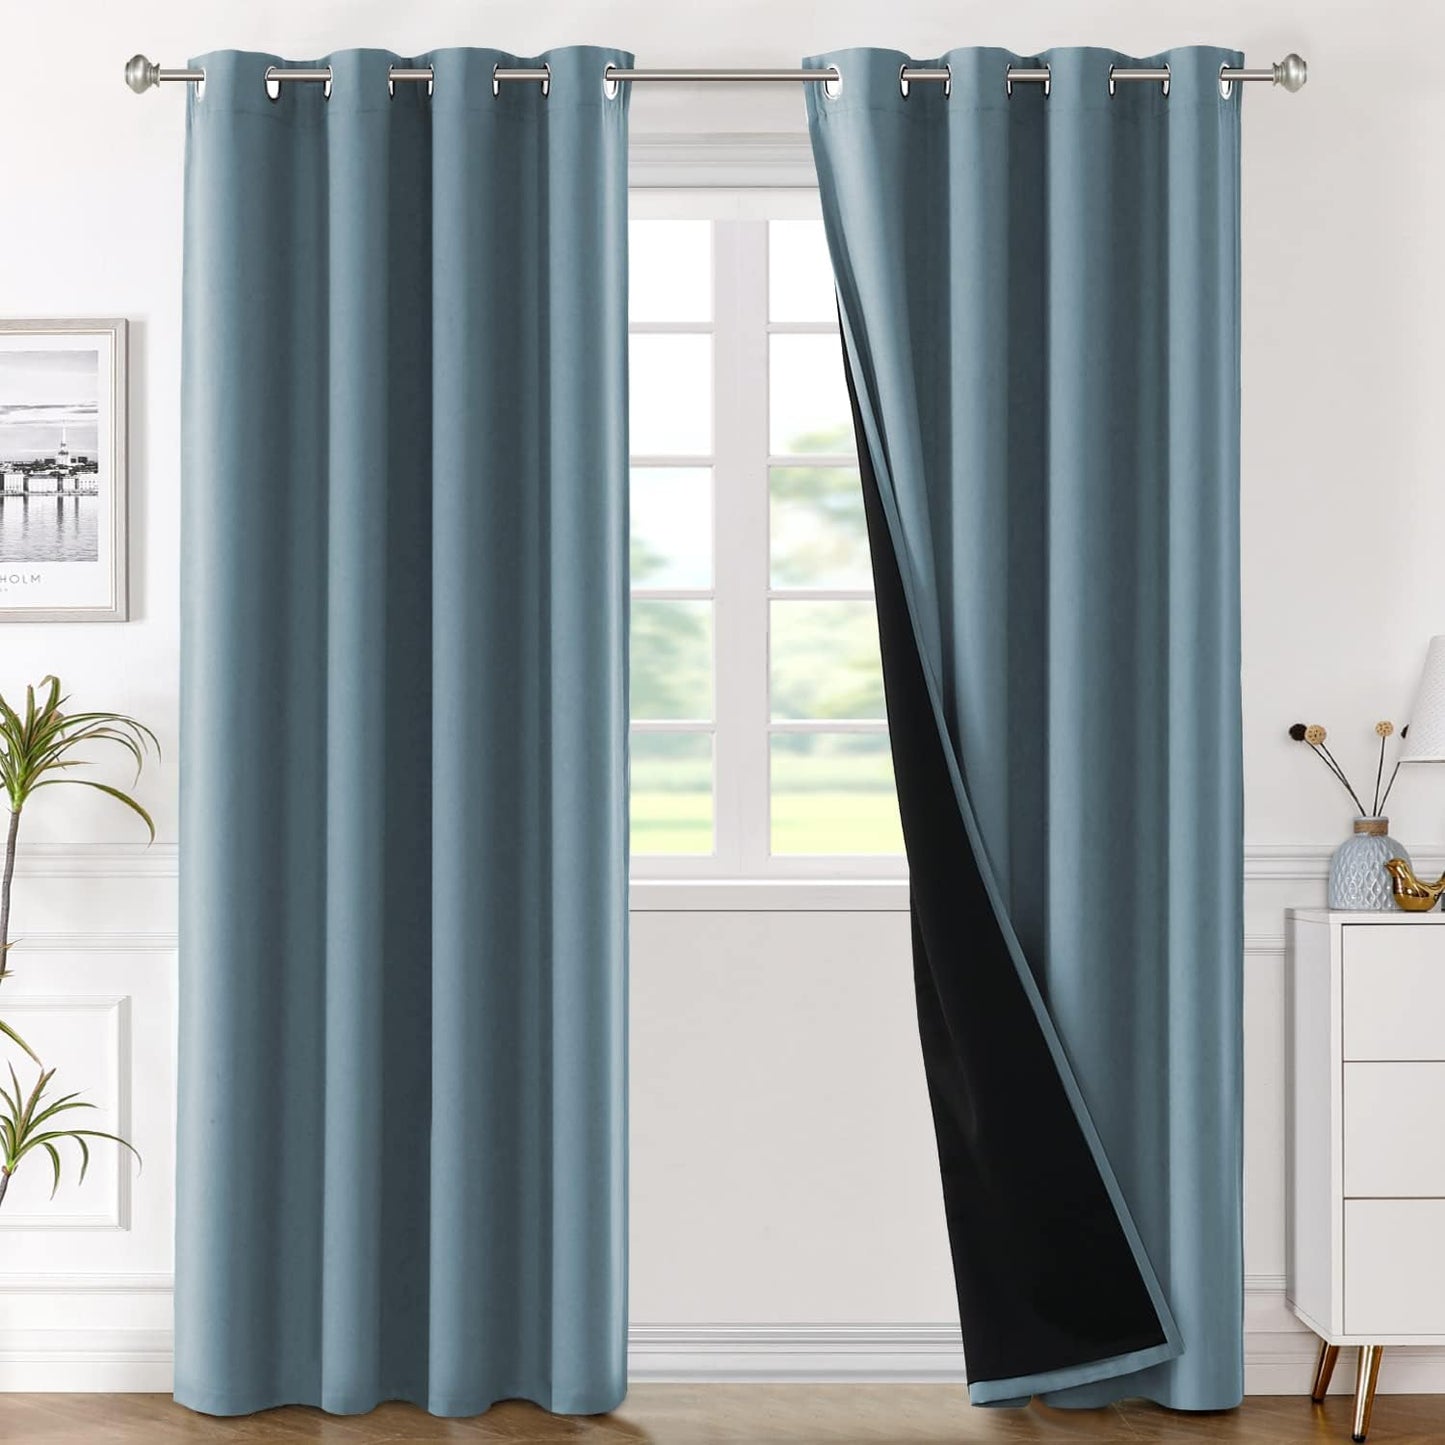 H.VERSAILTEX Blackout Curtains with Liner Backing, Thermal Insulated Curtains for Living Room, Noise Reducing Drapes, White, 52 Inches Wide X 96 Inches Long per Panel, Set of 2 Panels  H.VERSAILTEX Stone Blue 52"W X 96"L 